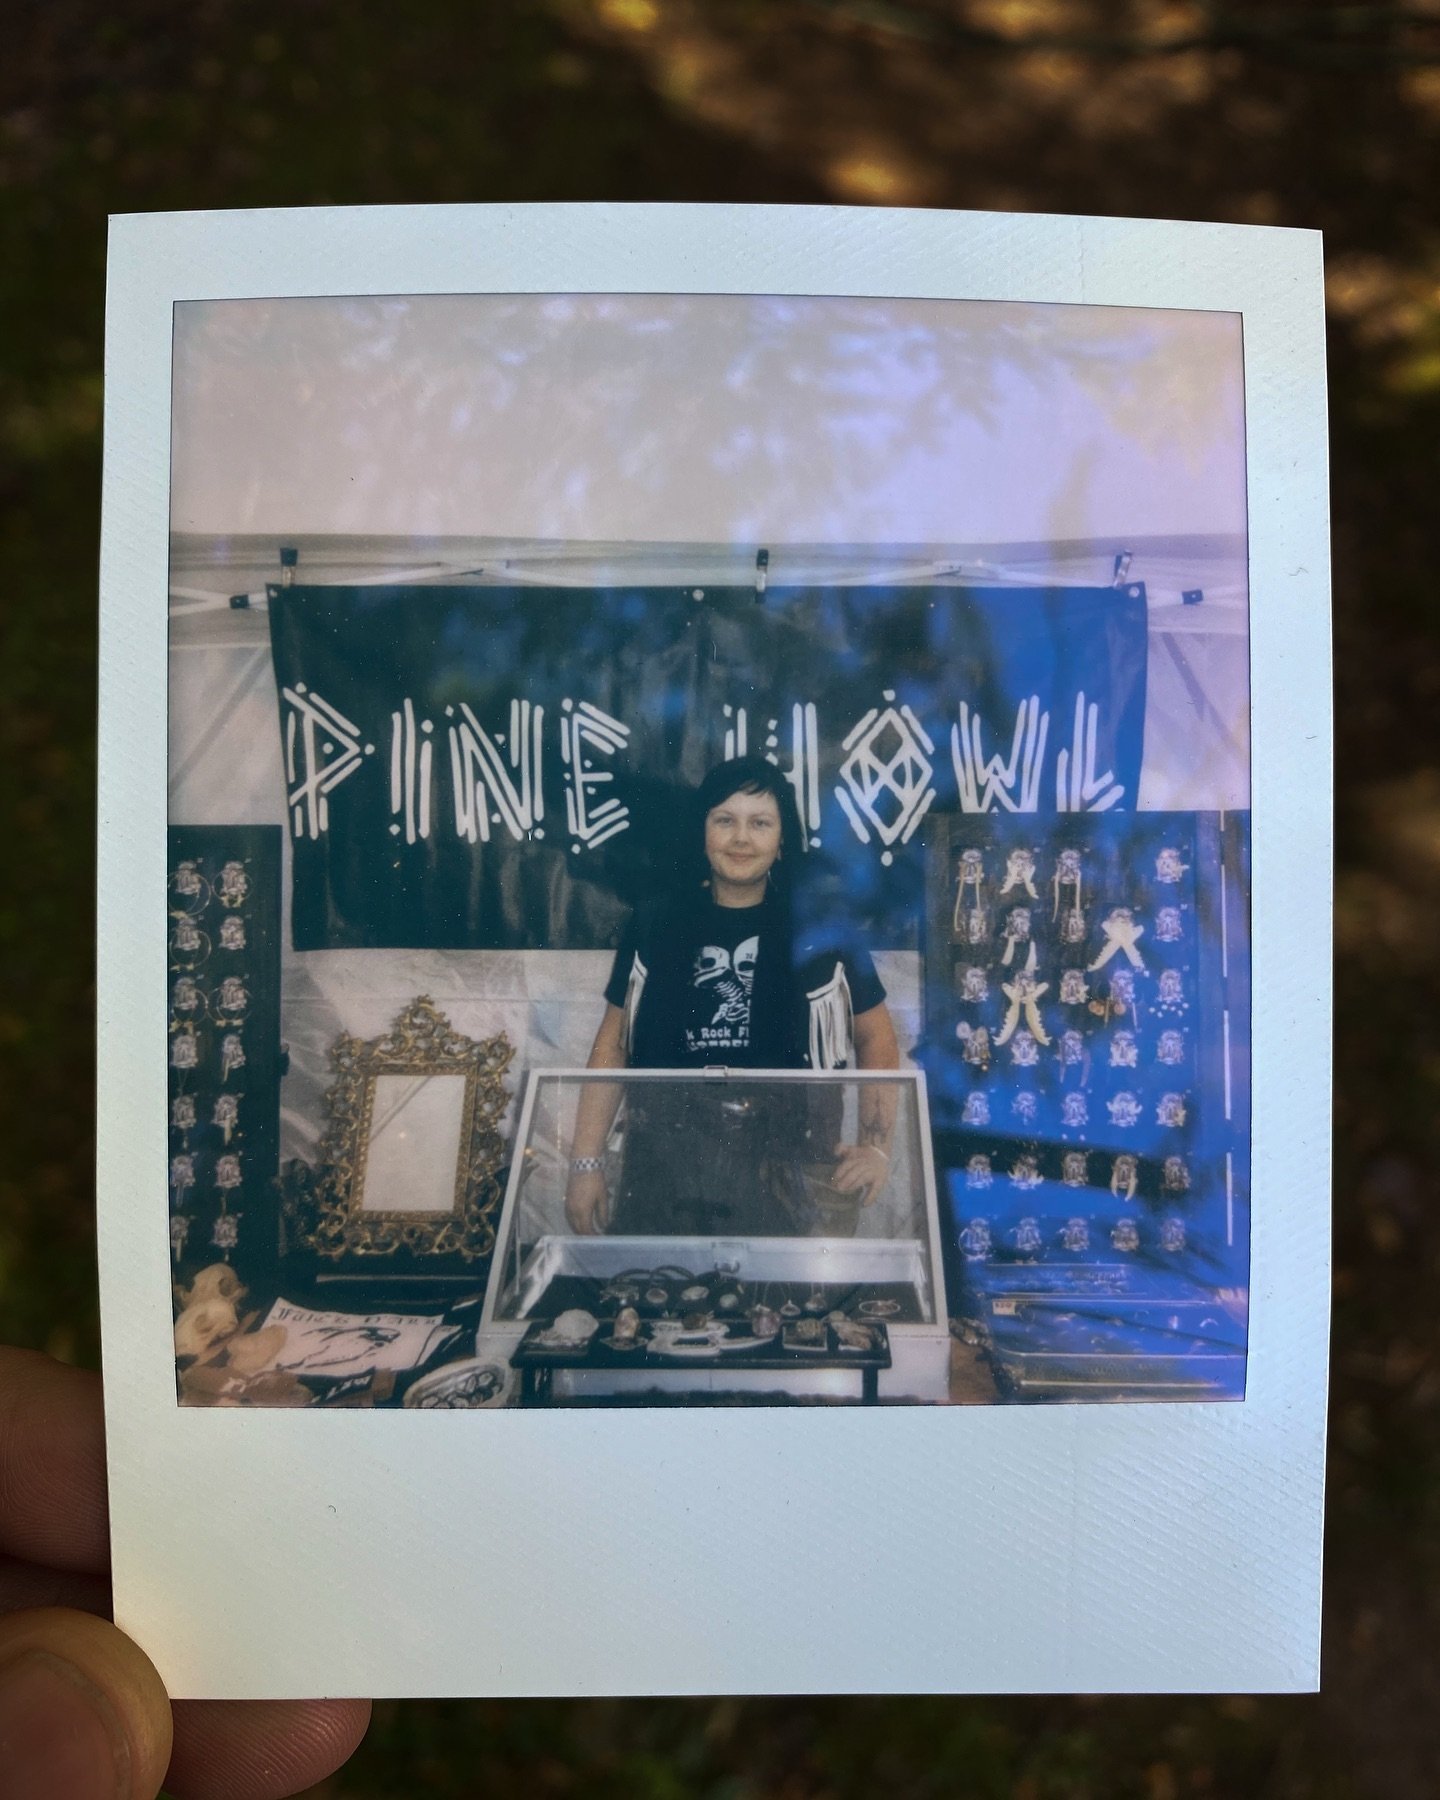 Murfreesboro PRFM 4-20-2024

A huge thanks to @punkrockfleamarket_knoxville_ for throwing another badass punk rock flea market and to the sweetie who took this Polaroid of me at my booth! 😘
.
I JUST CONFIRMED that I will be going to @yallmartsc for 